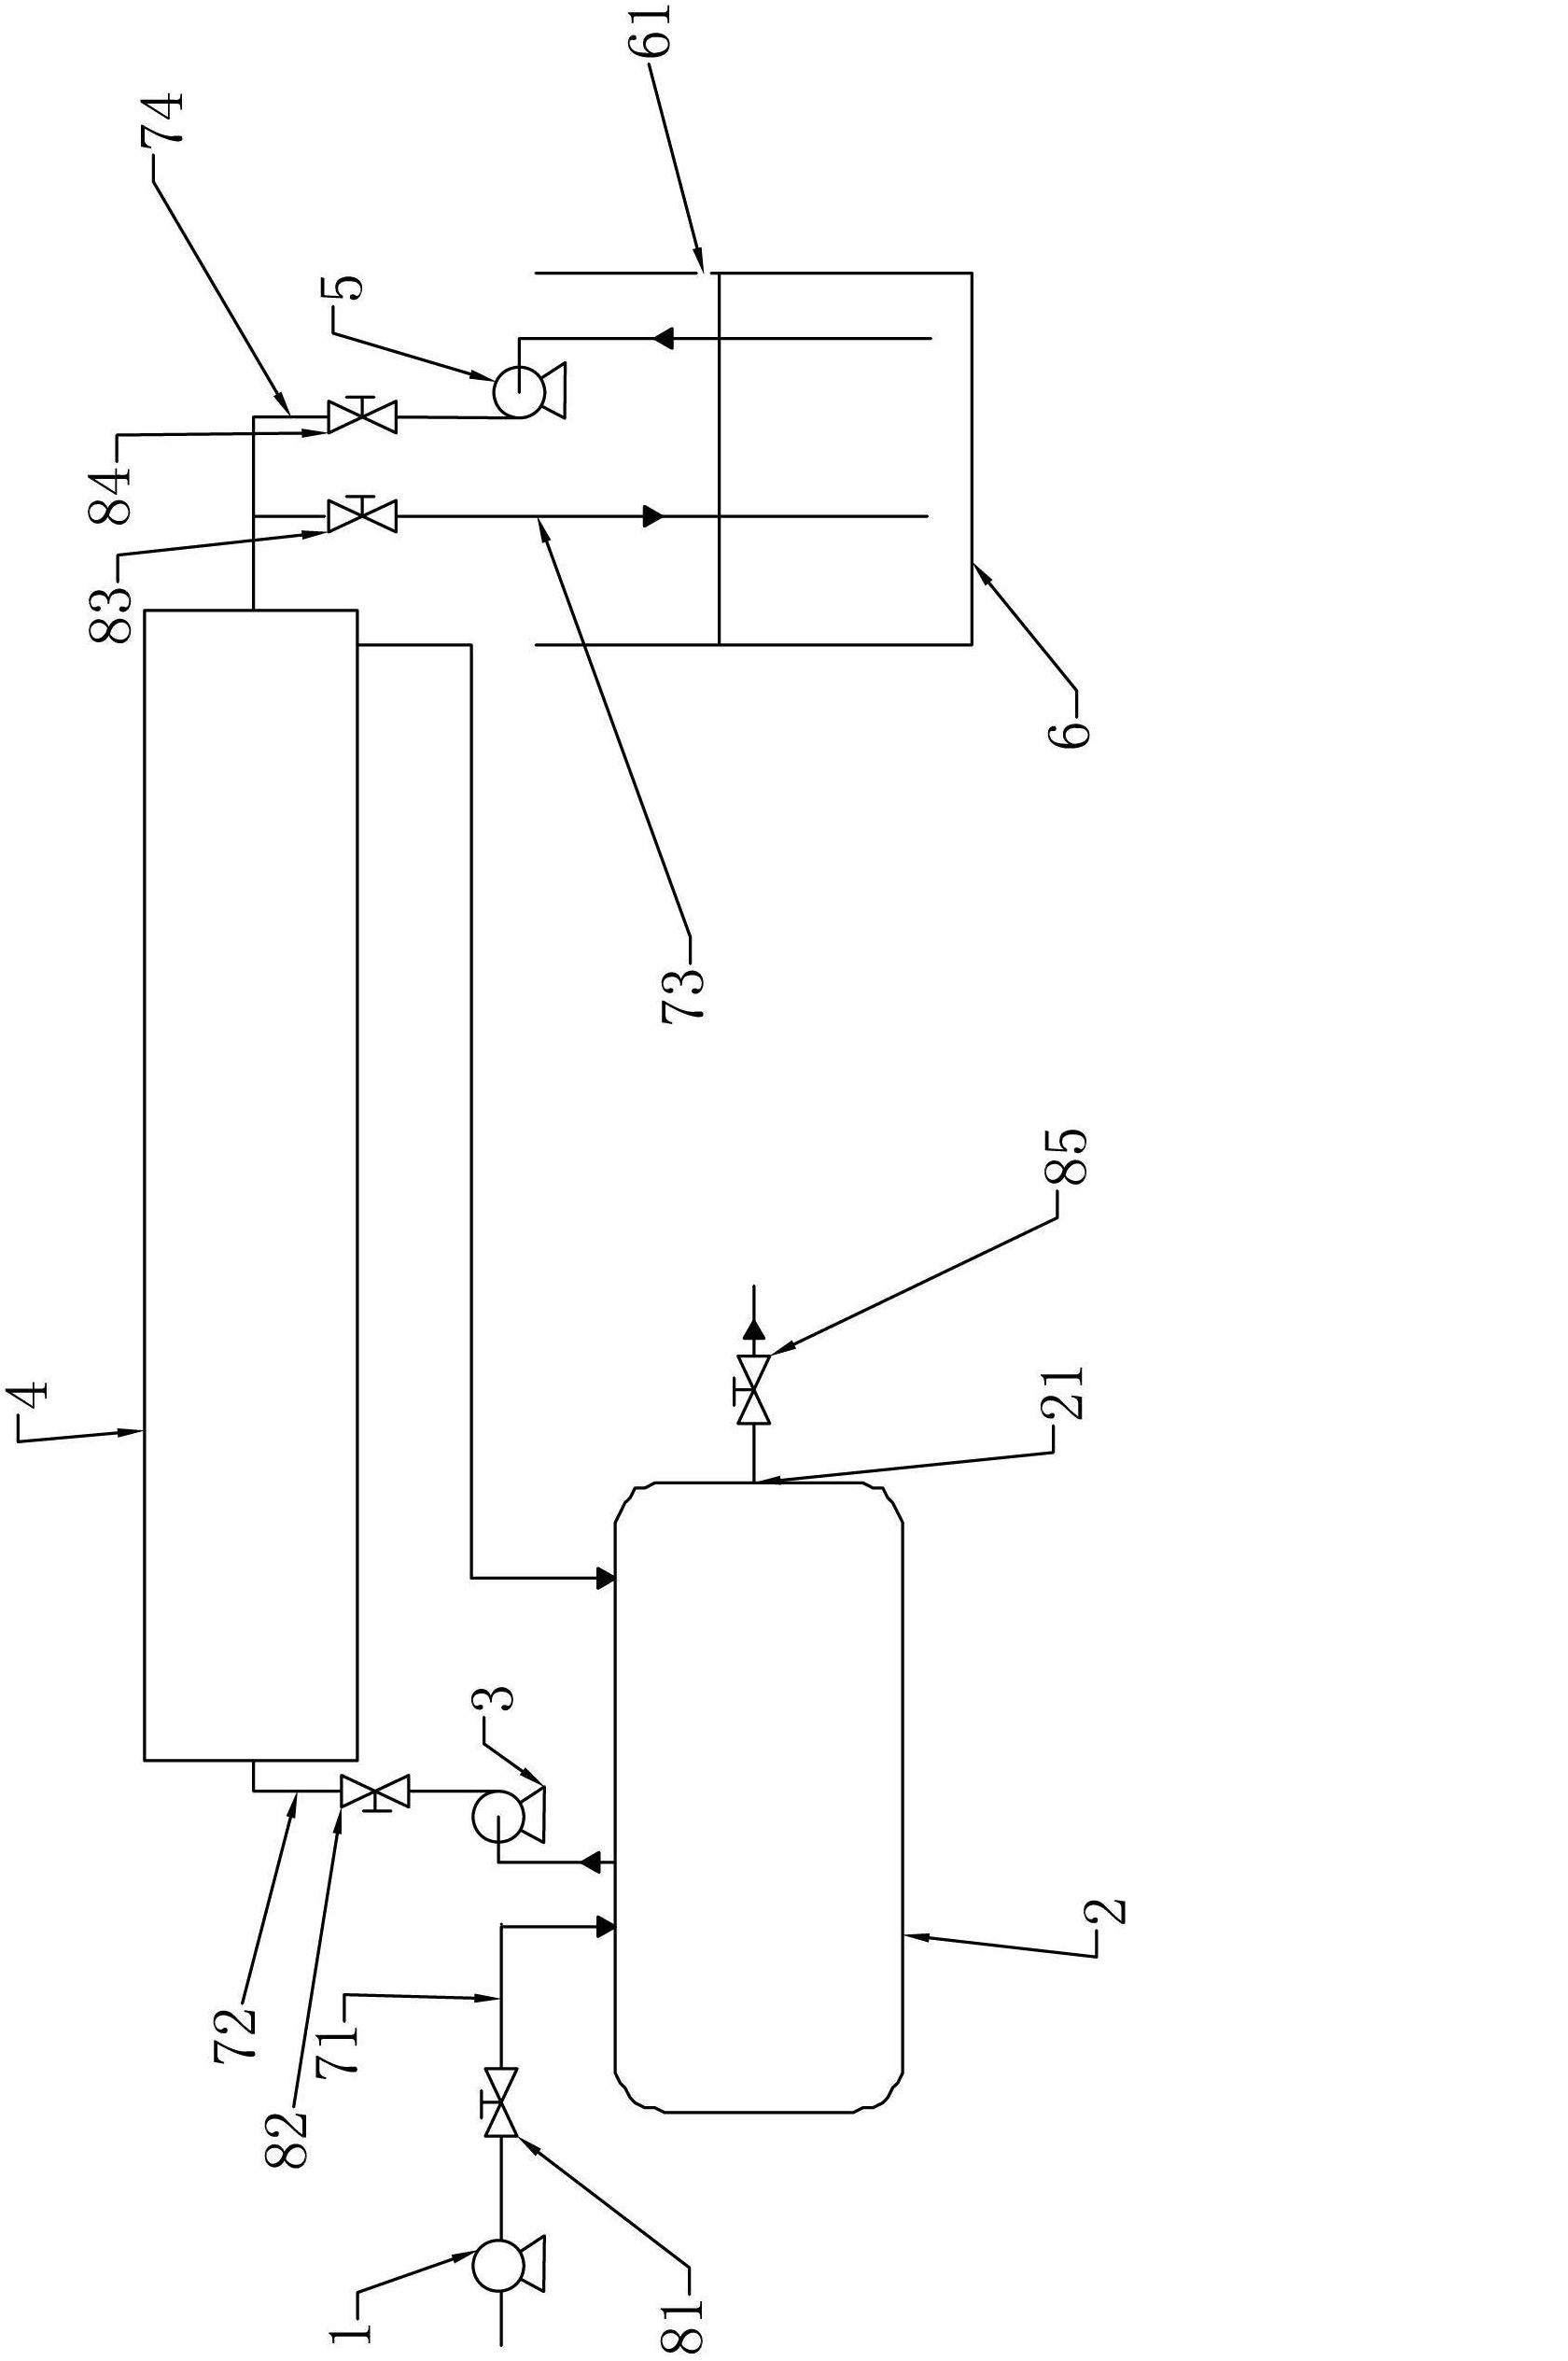 Keep-alive concentration method for chrysophyceae and device for implementing method